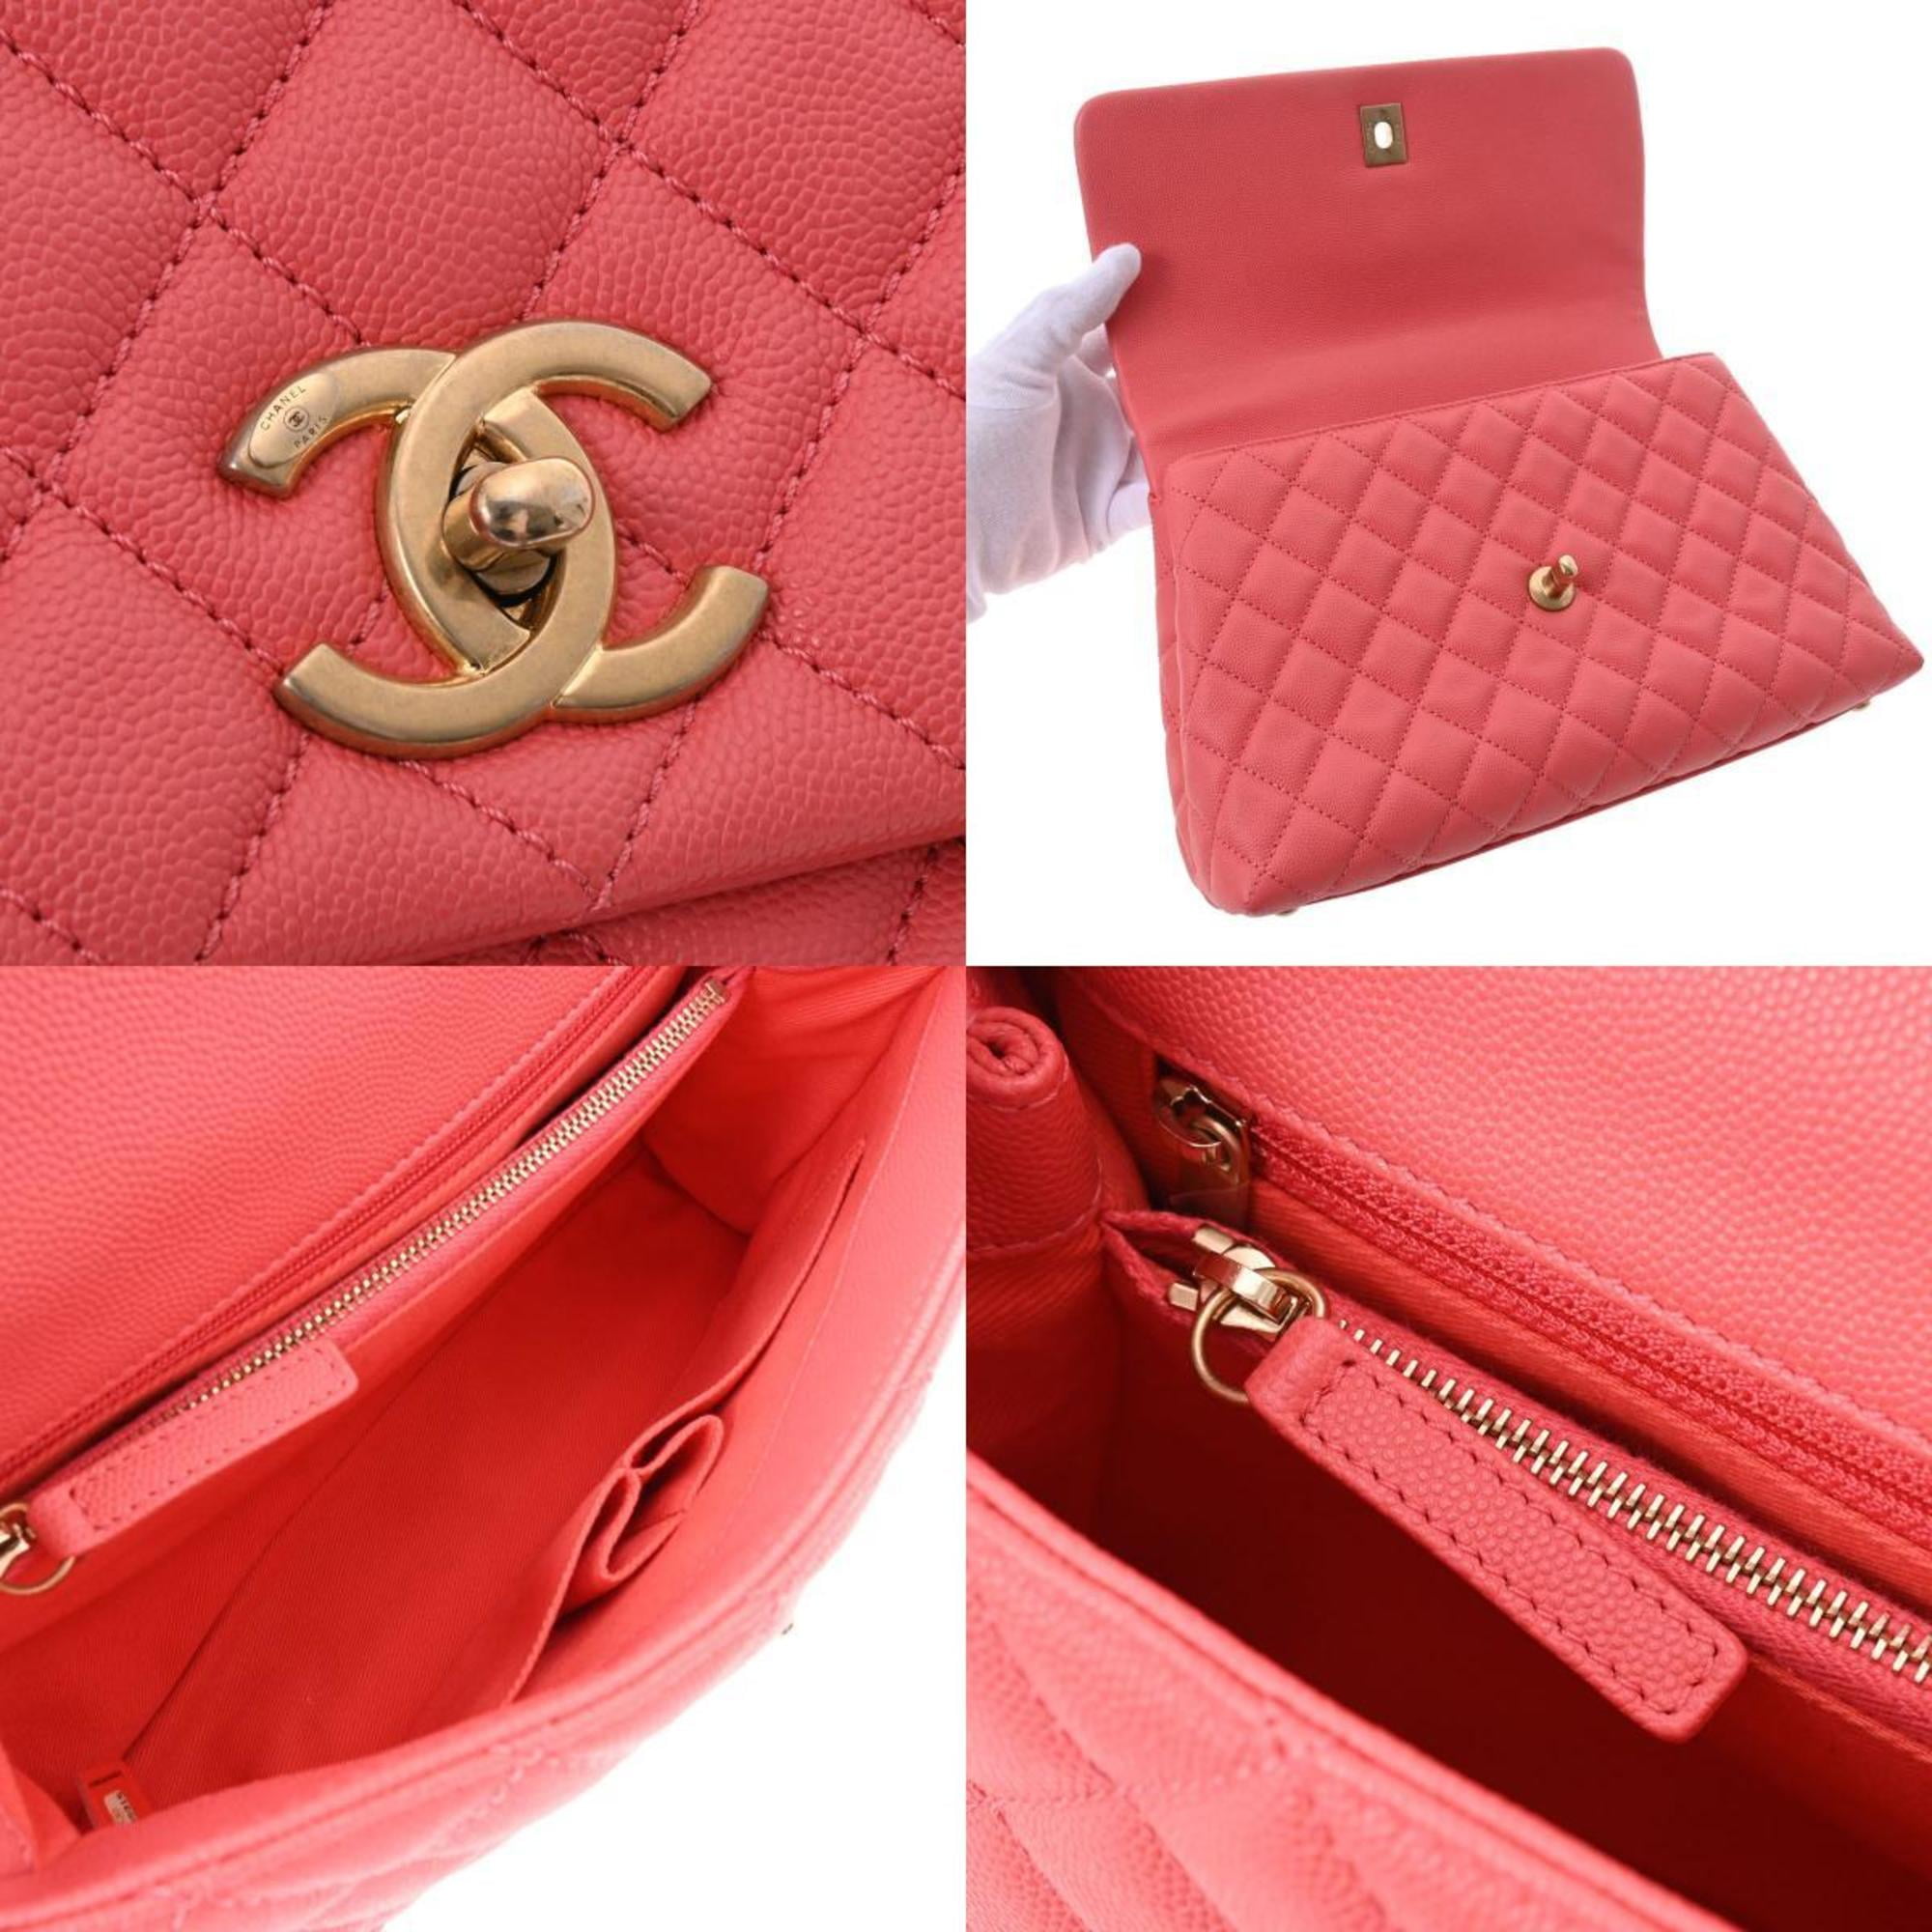 used Pre-owned Chanel Chanel Matelasse Coco Handle 28 Pink A92991 Ladies Caviar Skin Bag (Good), Adult Unisex, Size: (HxWxD): 19cm x 29cm x 11cm /